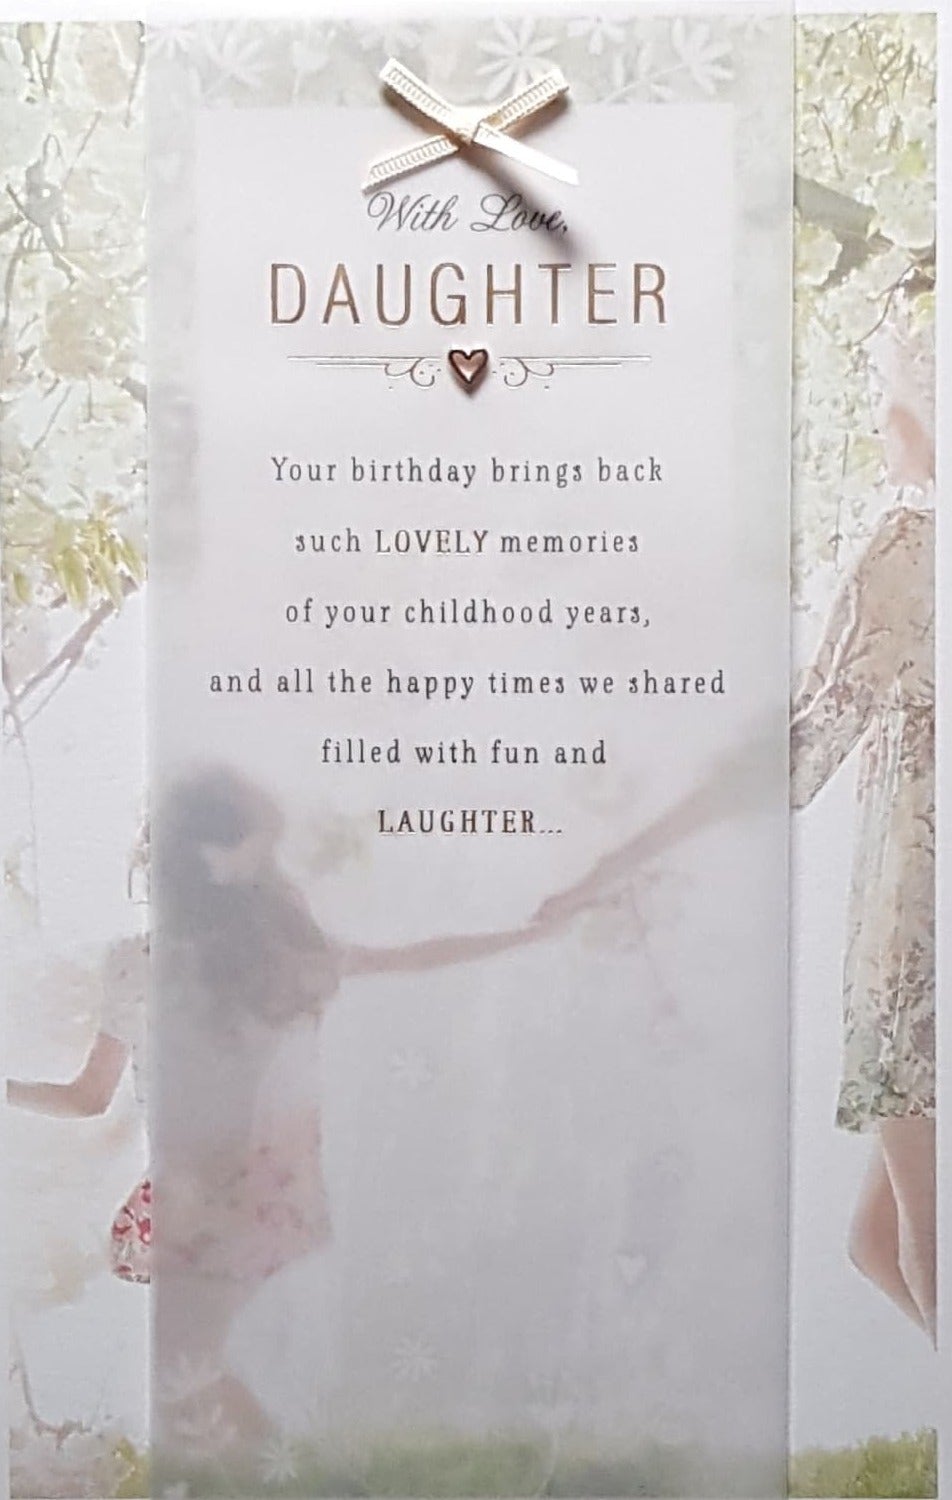 Birthday Card - Daughter / a Small Gold Heart, A Verse & Nostalgic Image Background